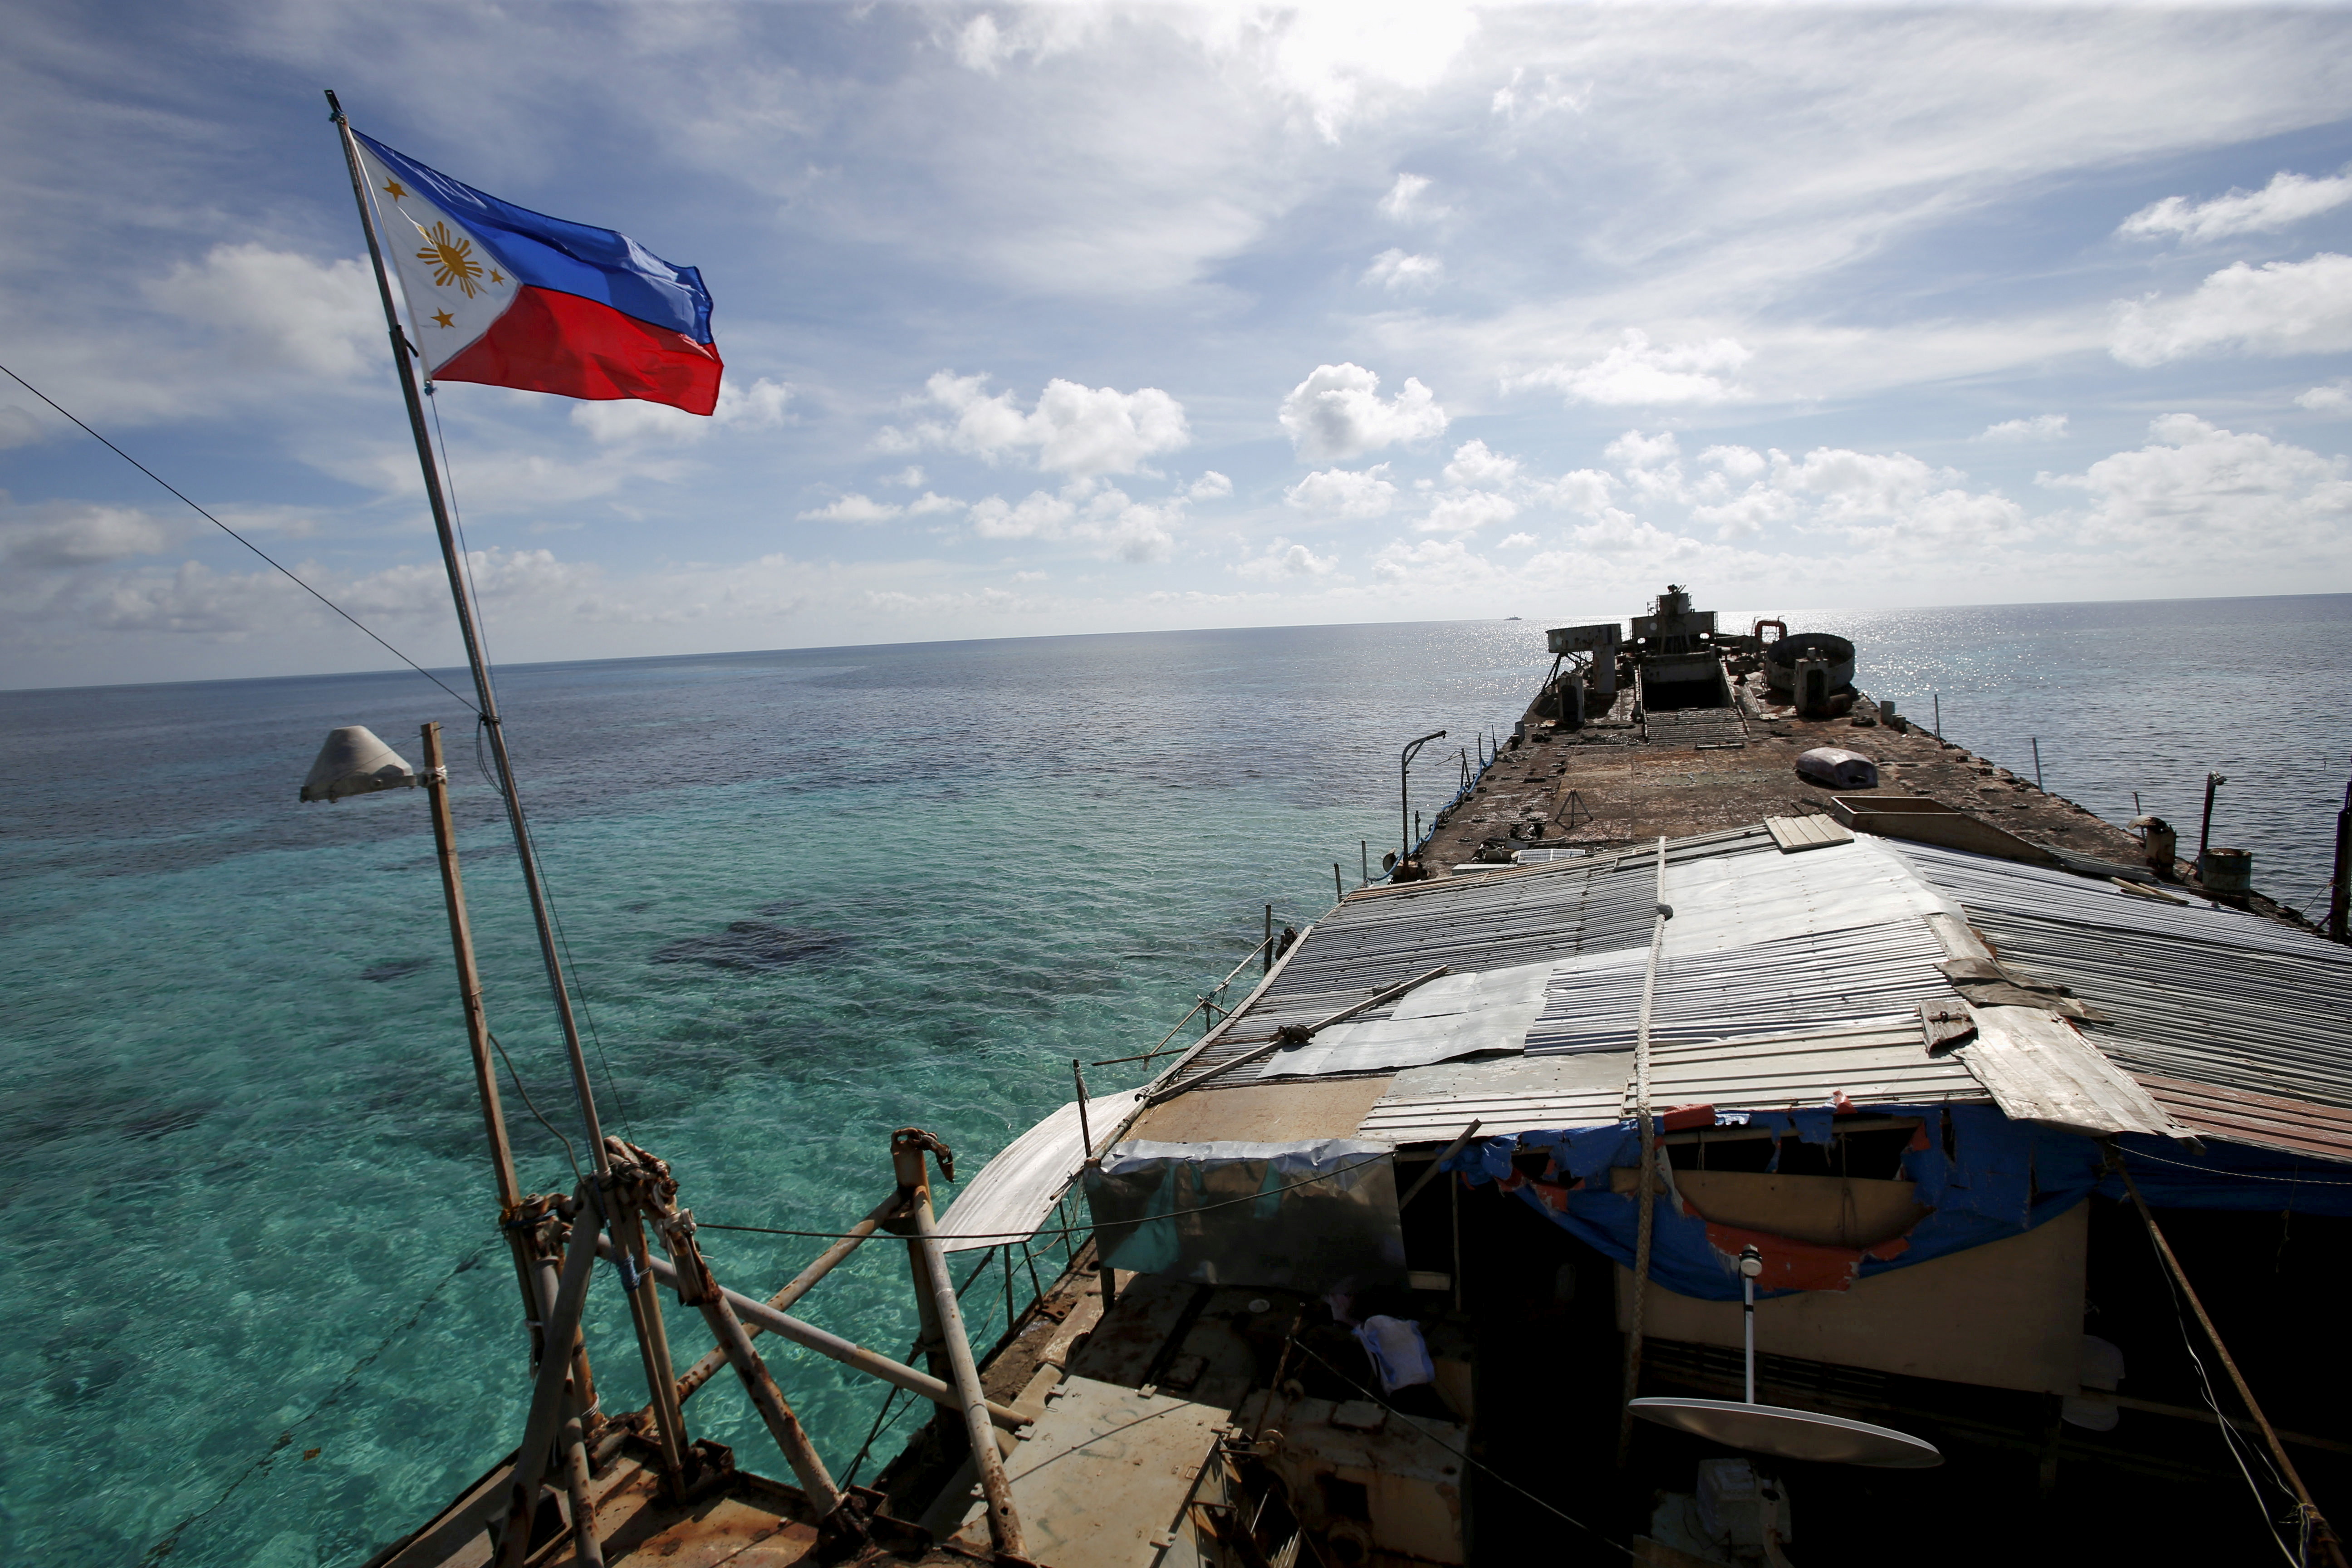 Philippines tells China to 'back off' after South China Sea standoff | Reuters